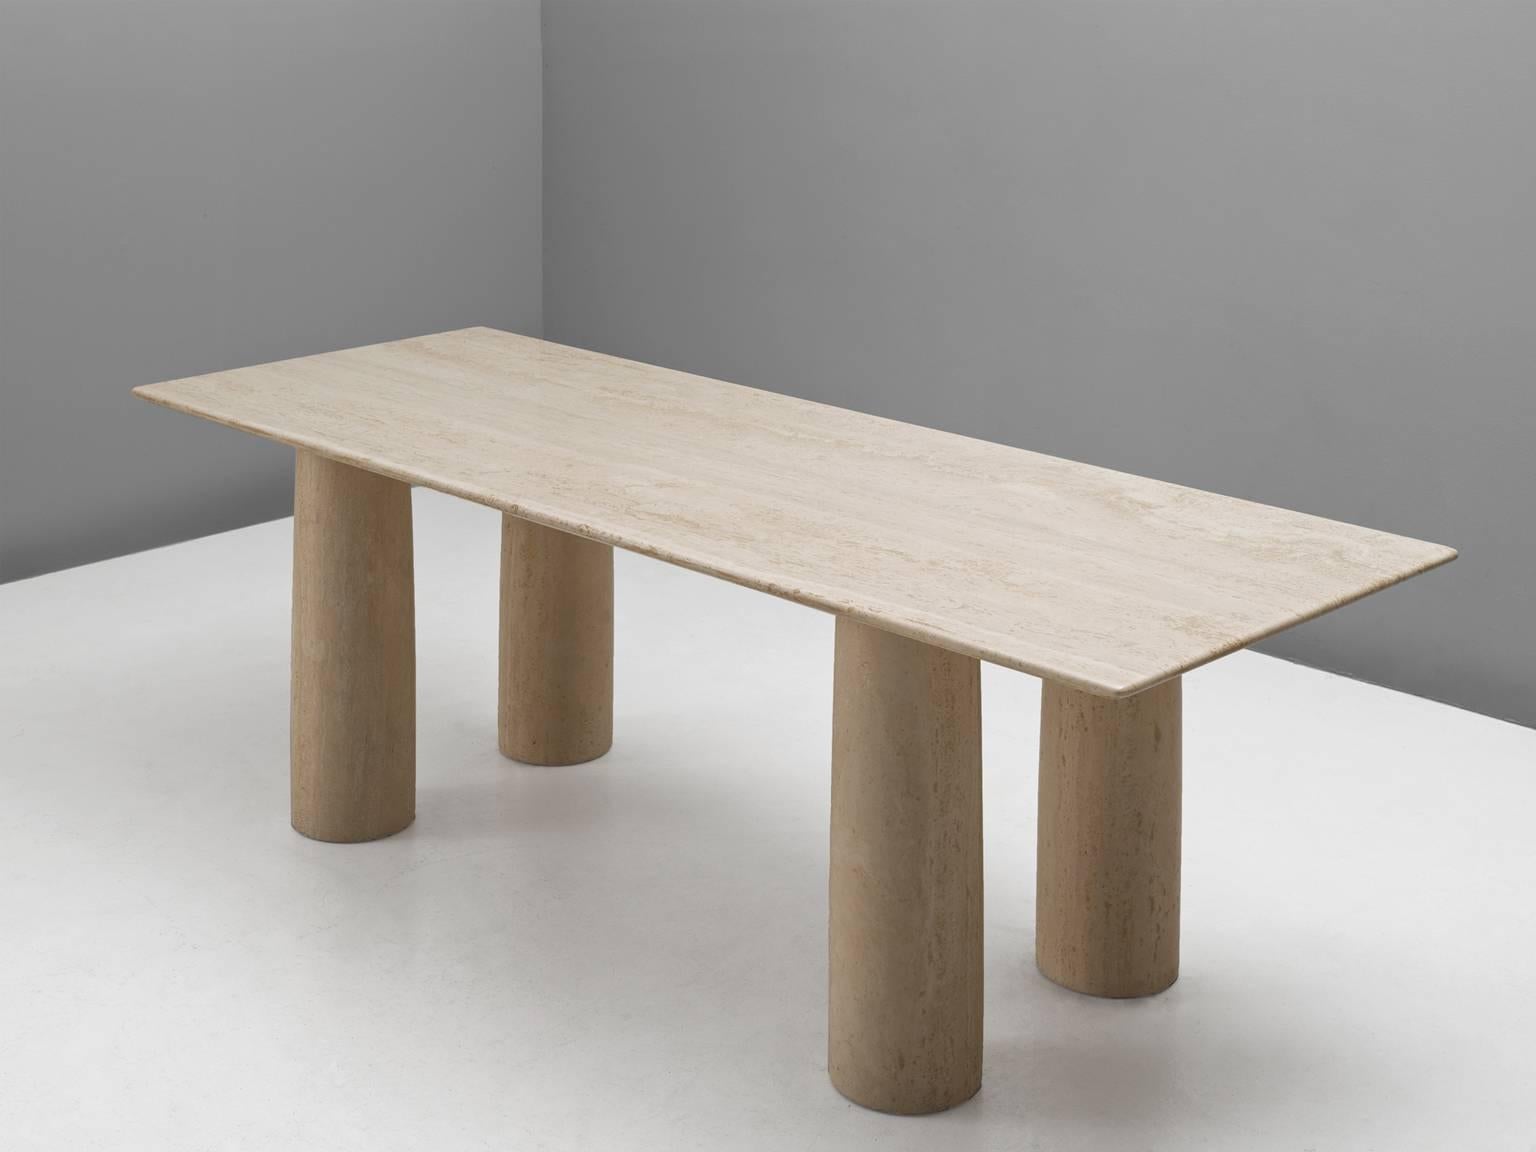 Table 'Il Colonnato', in travertine, by Mario Bellini for Cassina, Italy, 1970s.

This exceptional 'Il Colonnato' dining table was designed by Italian designer Mario Bellini (1935-). This centre table consist of four cylindrical legs and a square